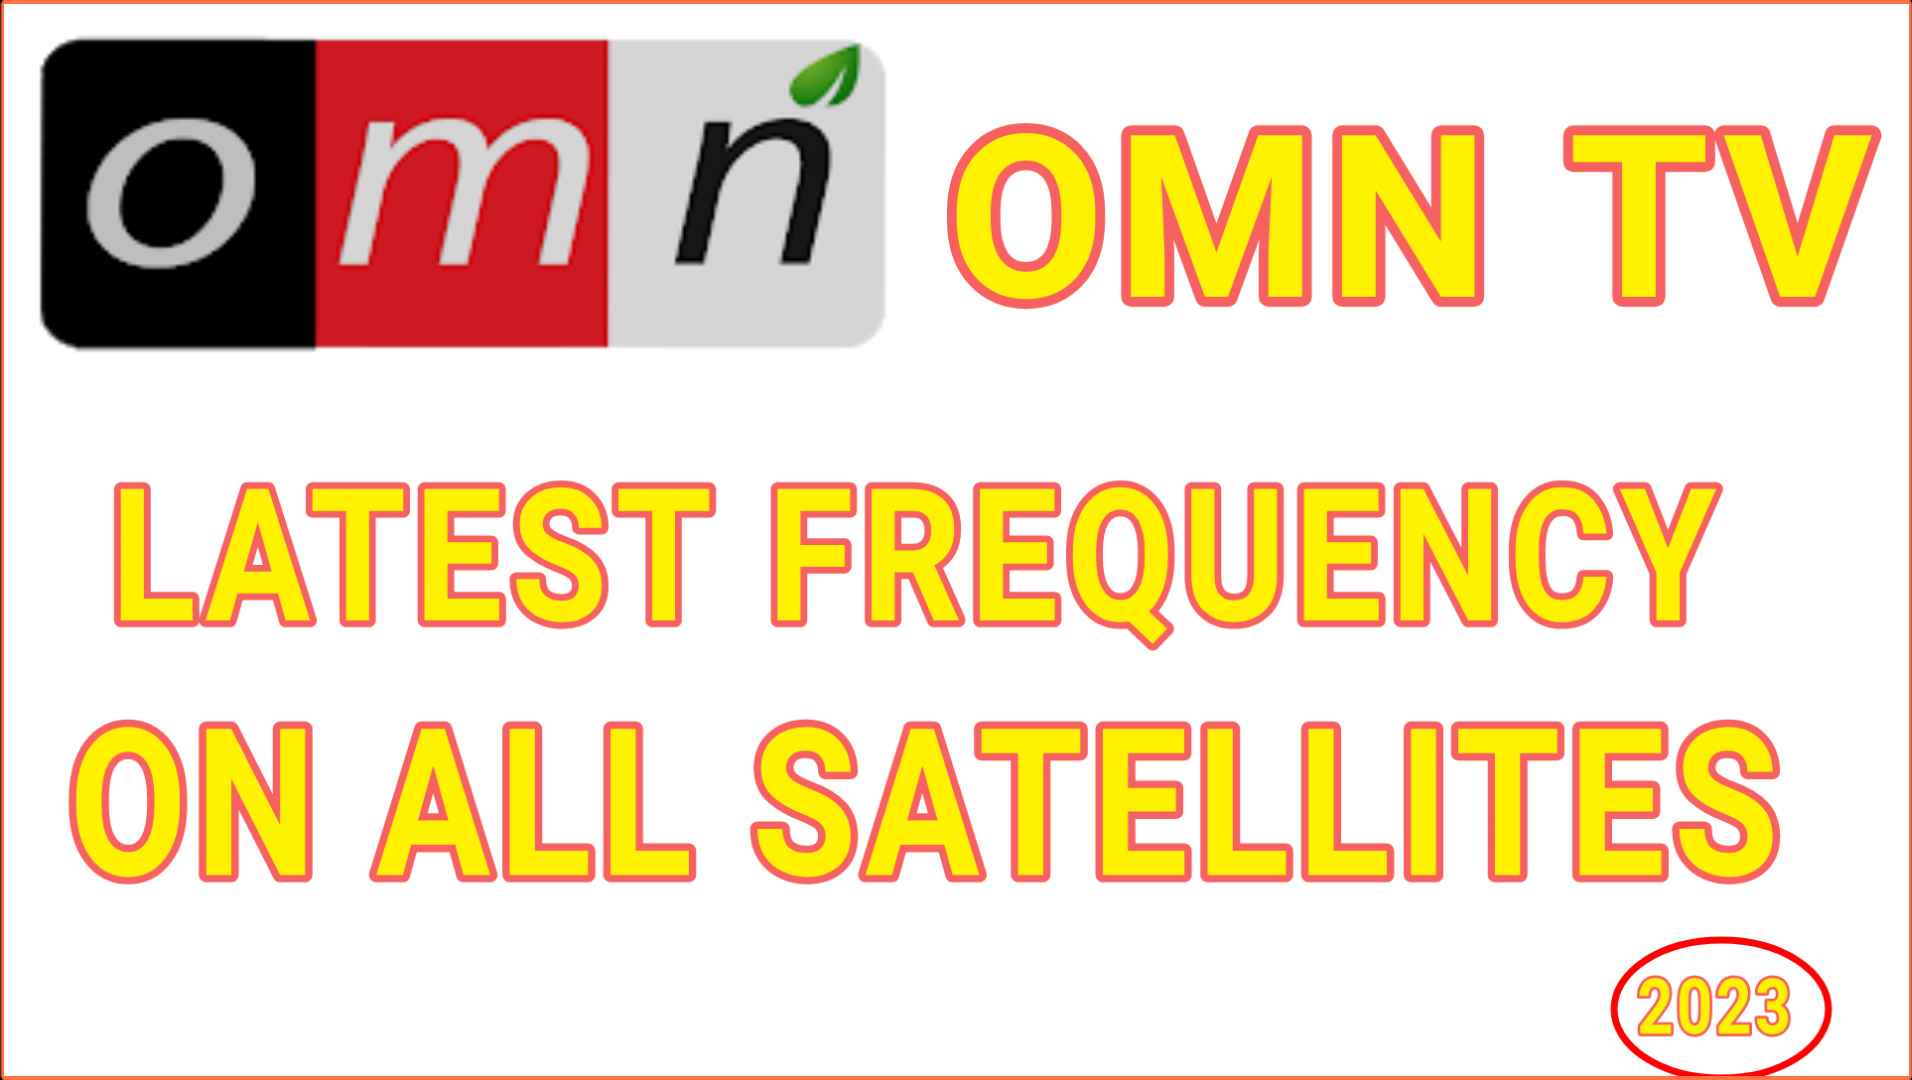 omn tv frequency 2023